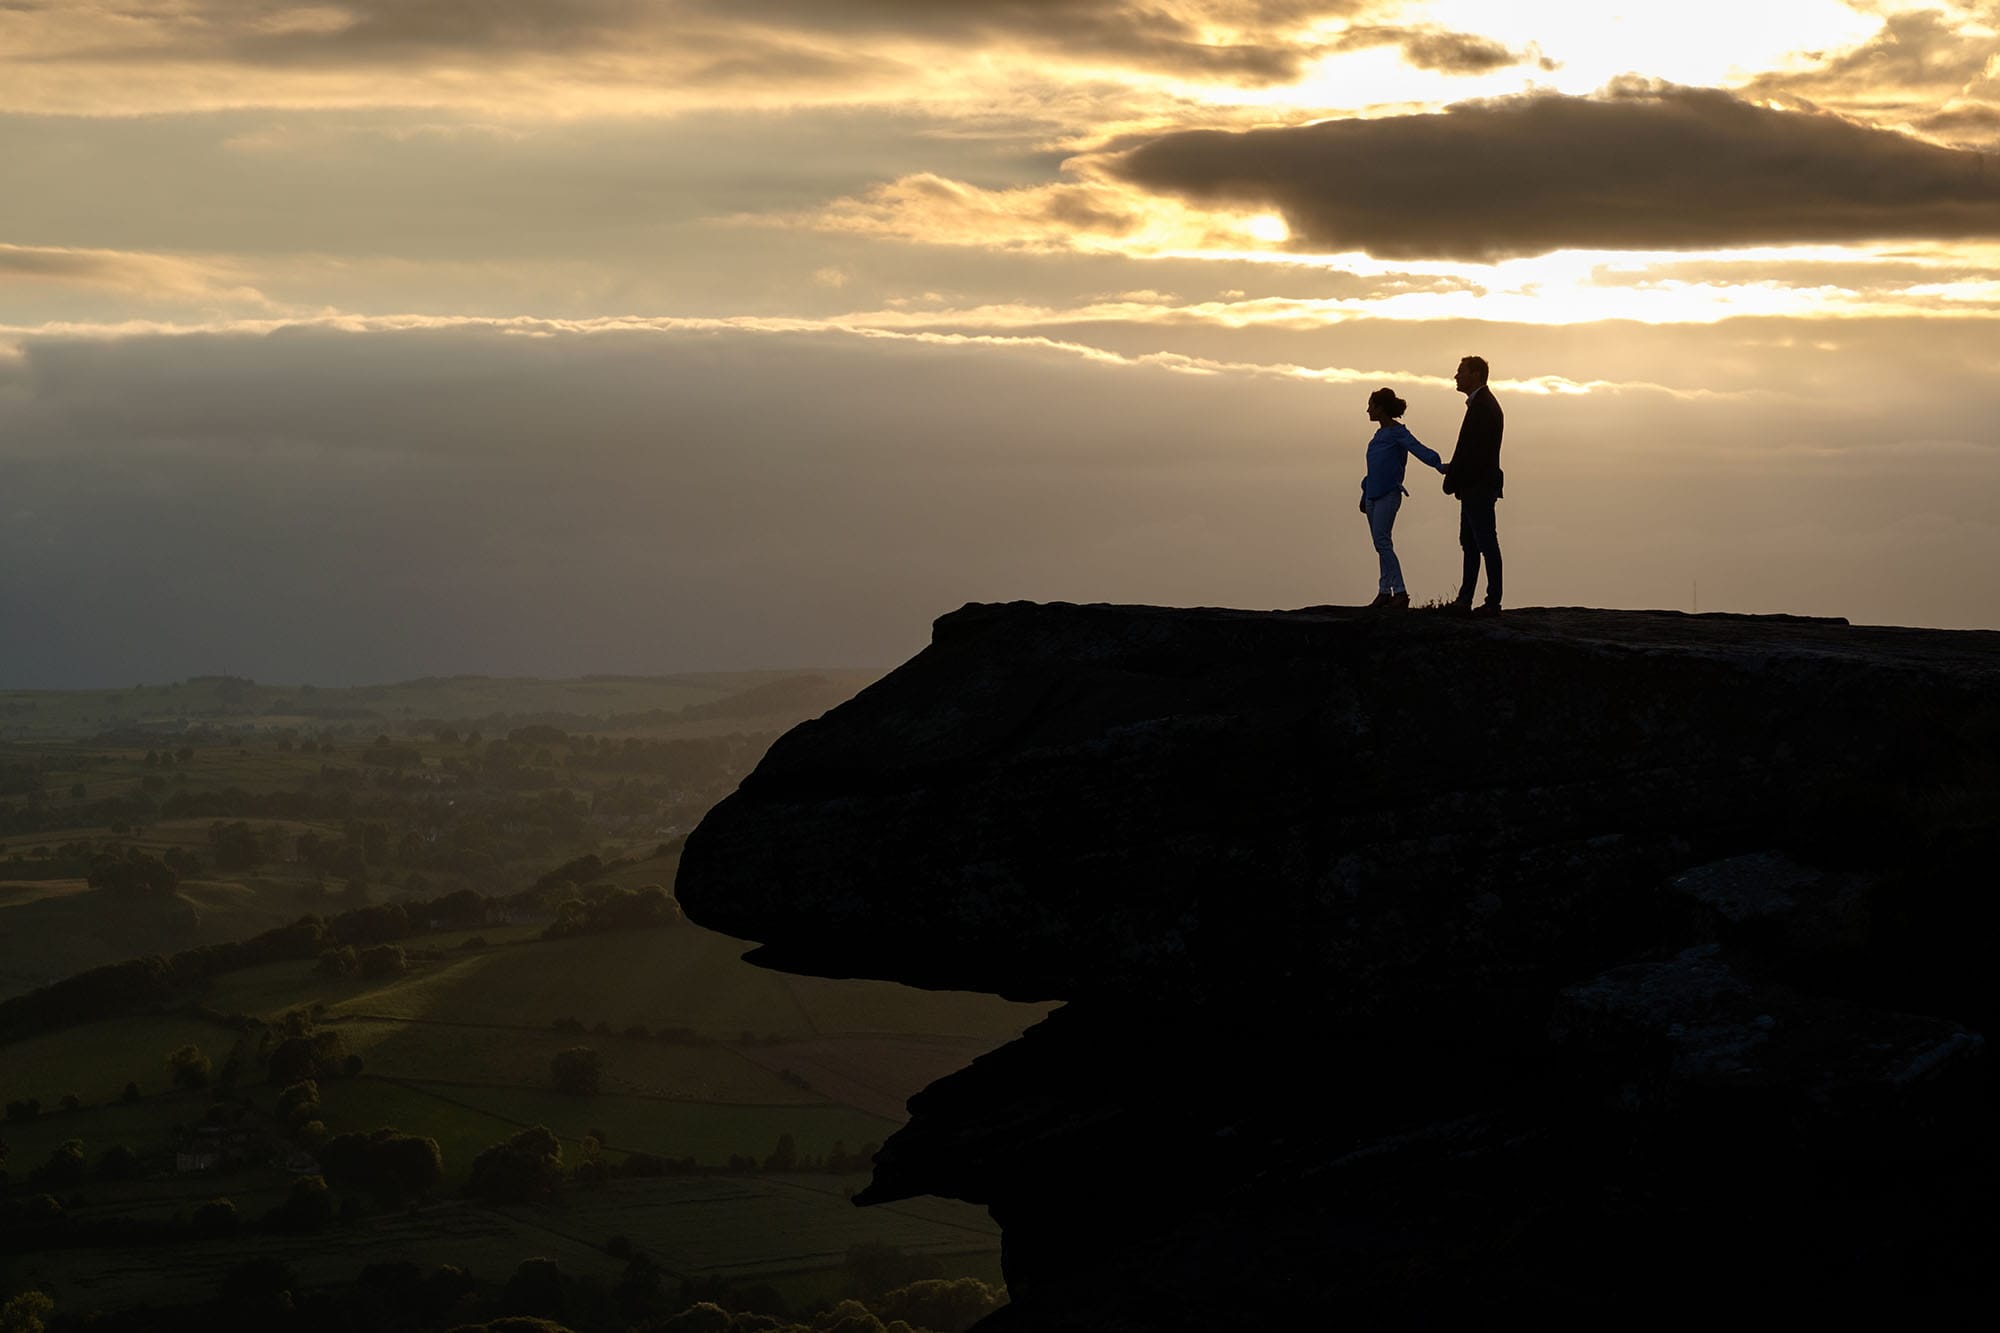 Peak District pre-wedding photography Christina and Toby edge